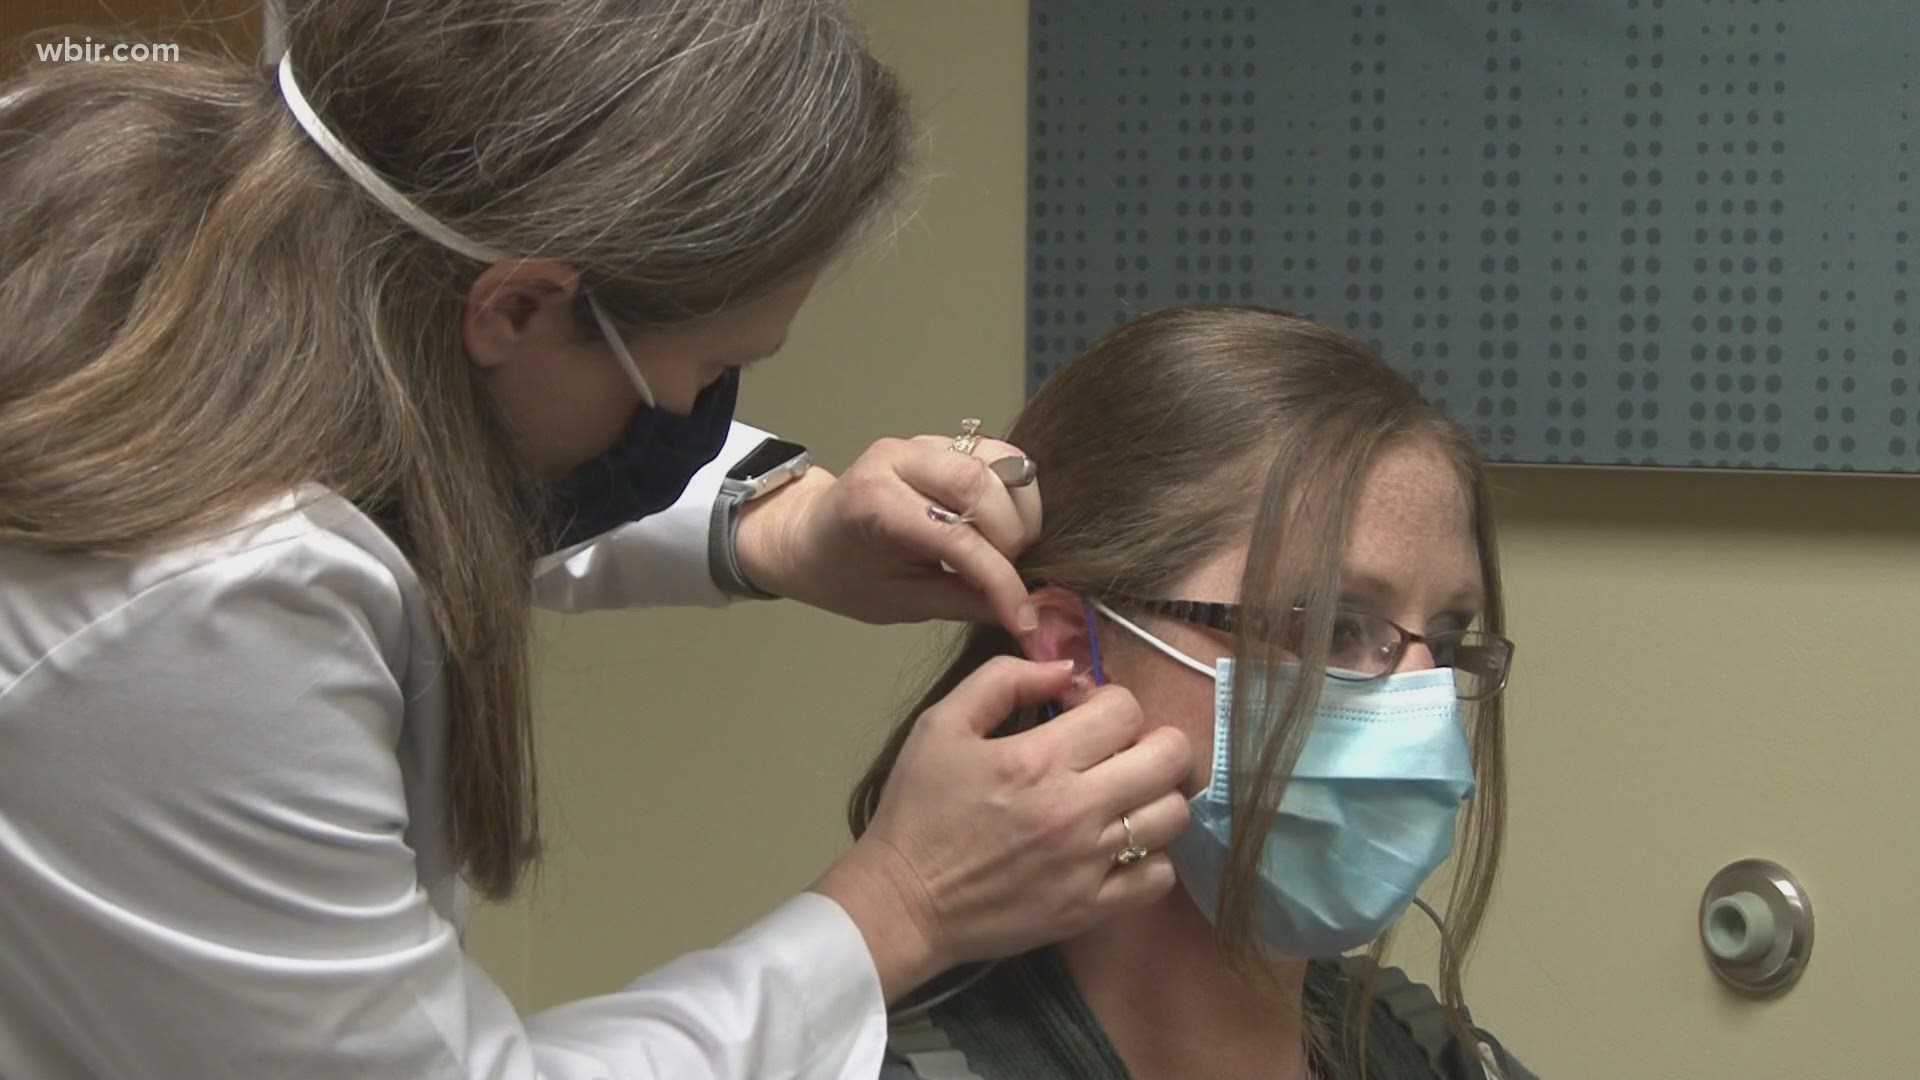 The 33-year-old mother of two suffers from hearing loss and was unable to afford hearing aids. On Thursday, she heard clearly for the first time.